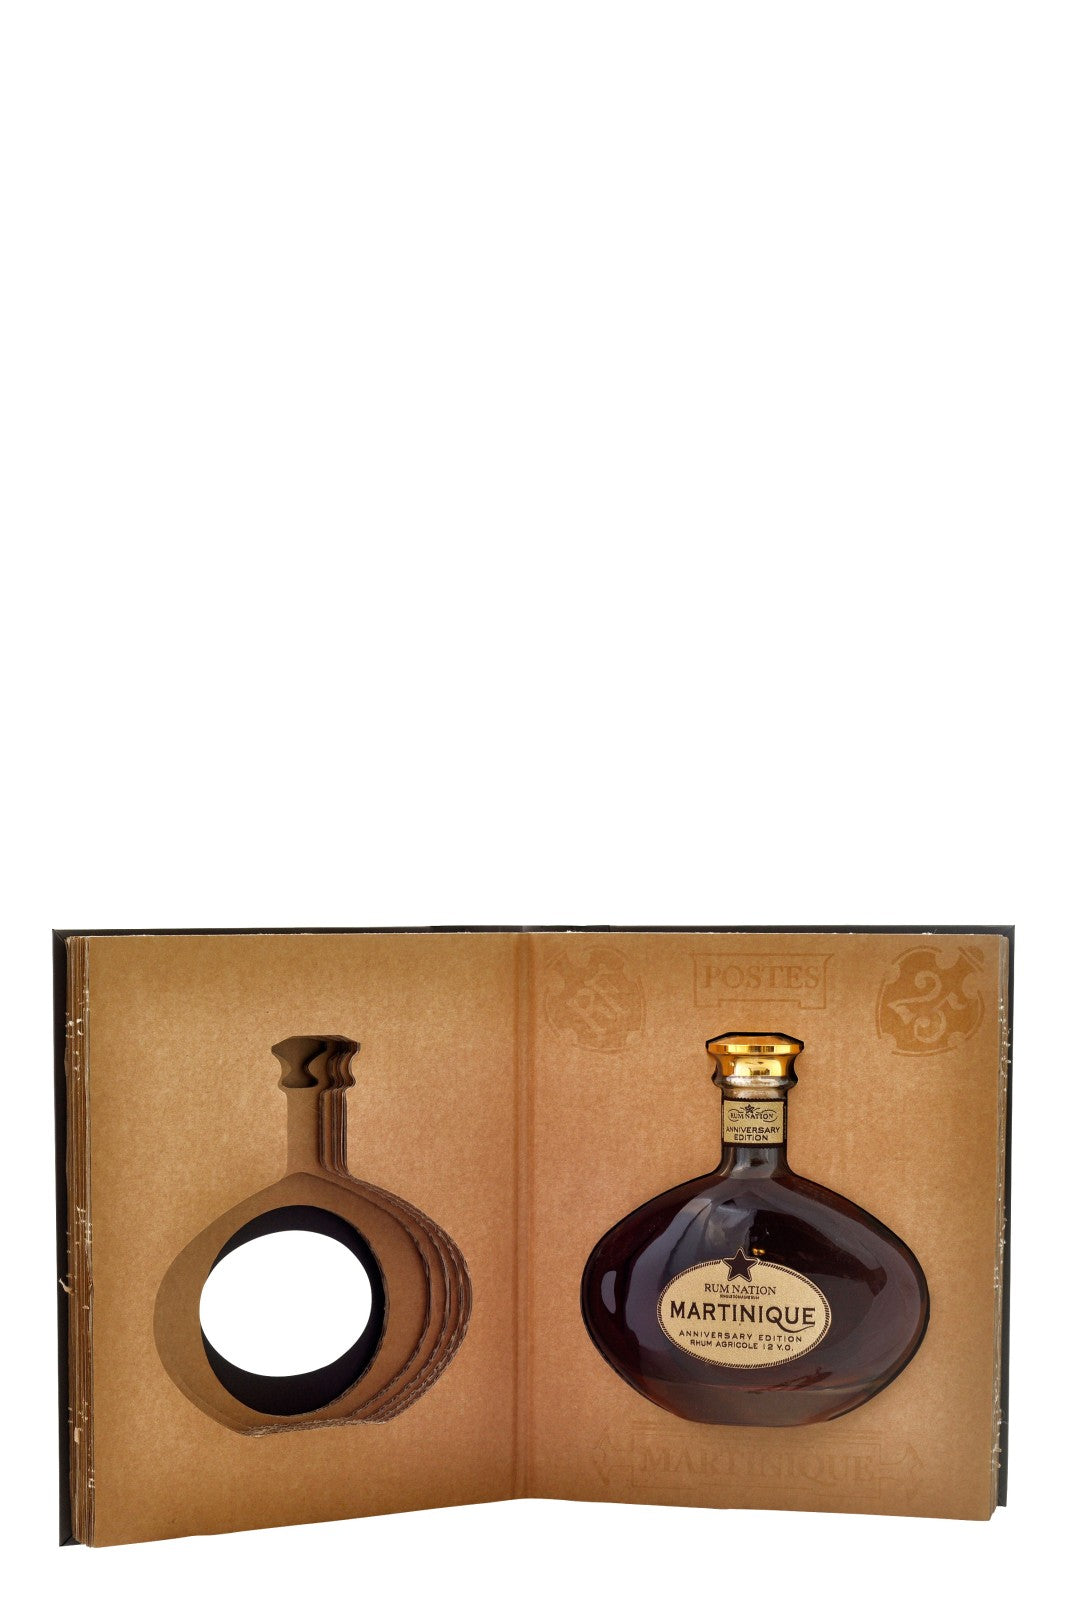 Rum Nation Martinique 12 Year Old Anniversary Edition